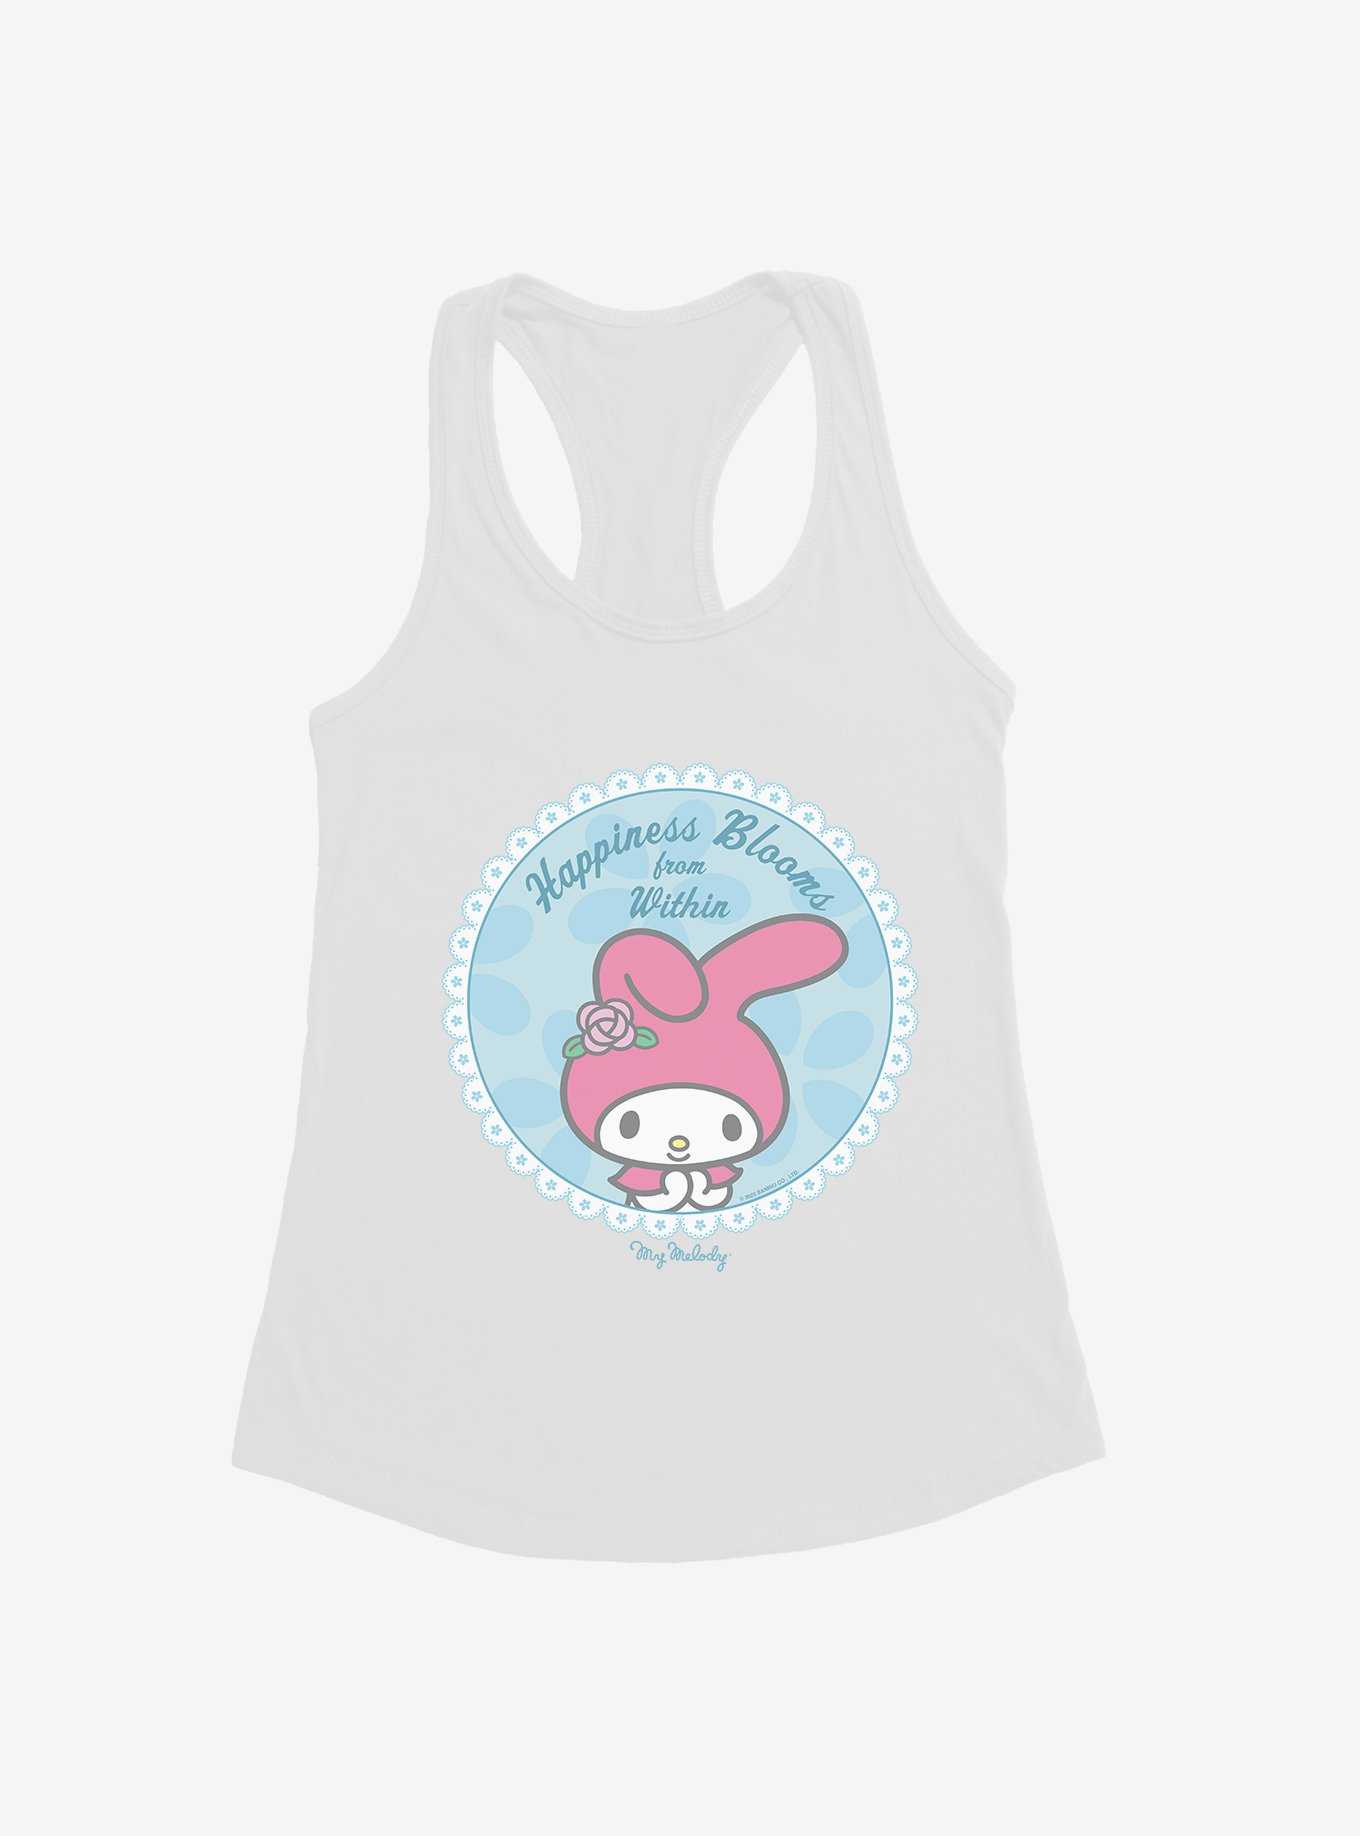 My Melody Happiness Blooms From Within Girls Tank, , hi-res